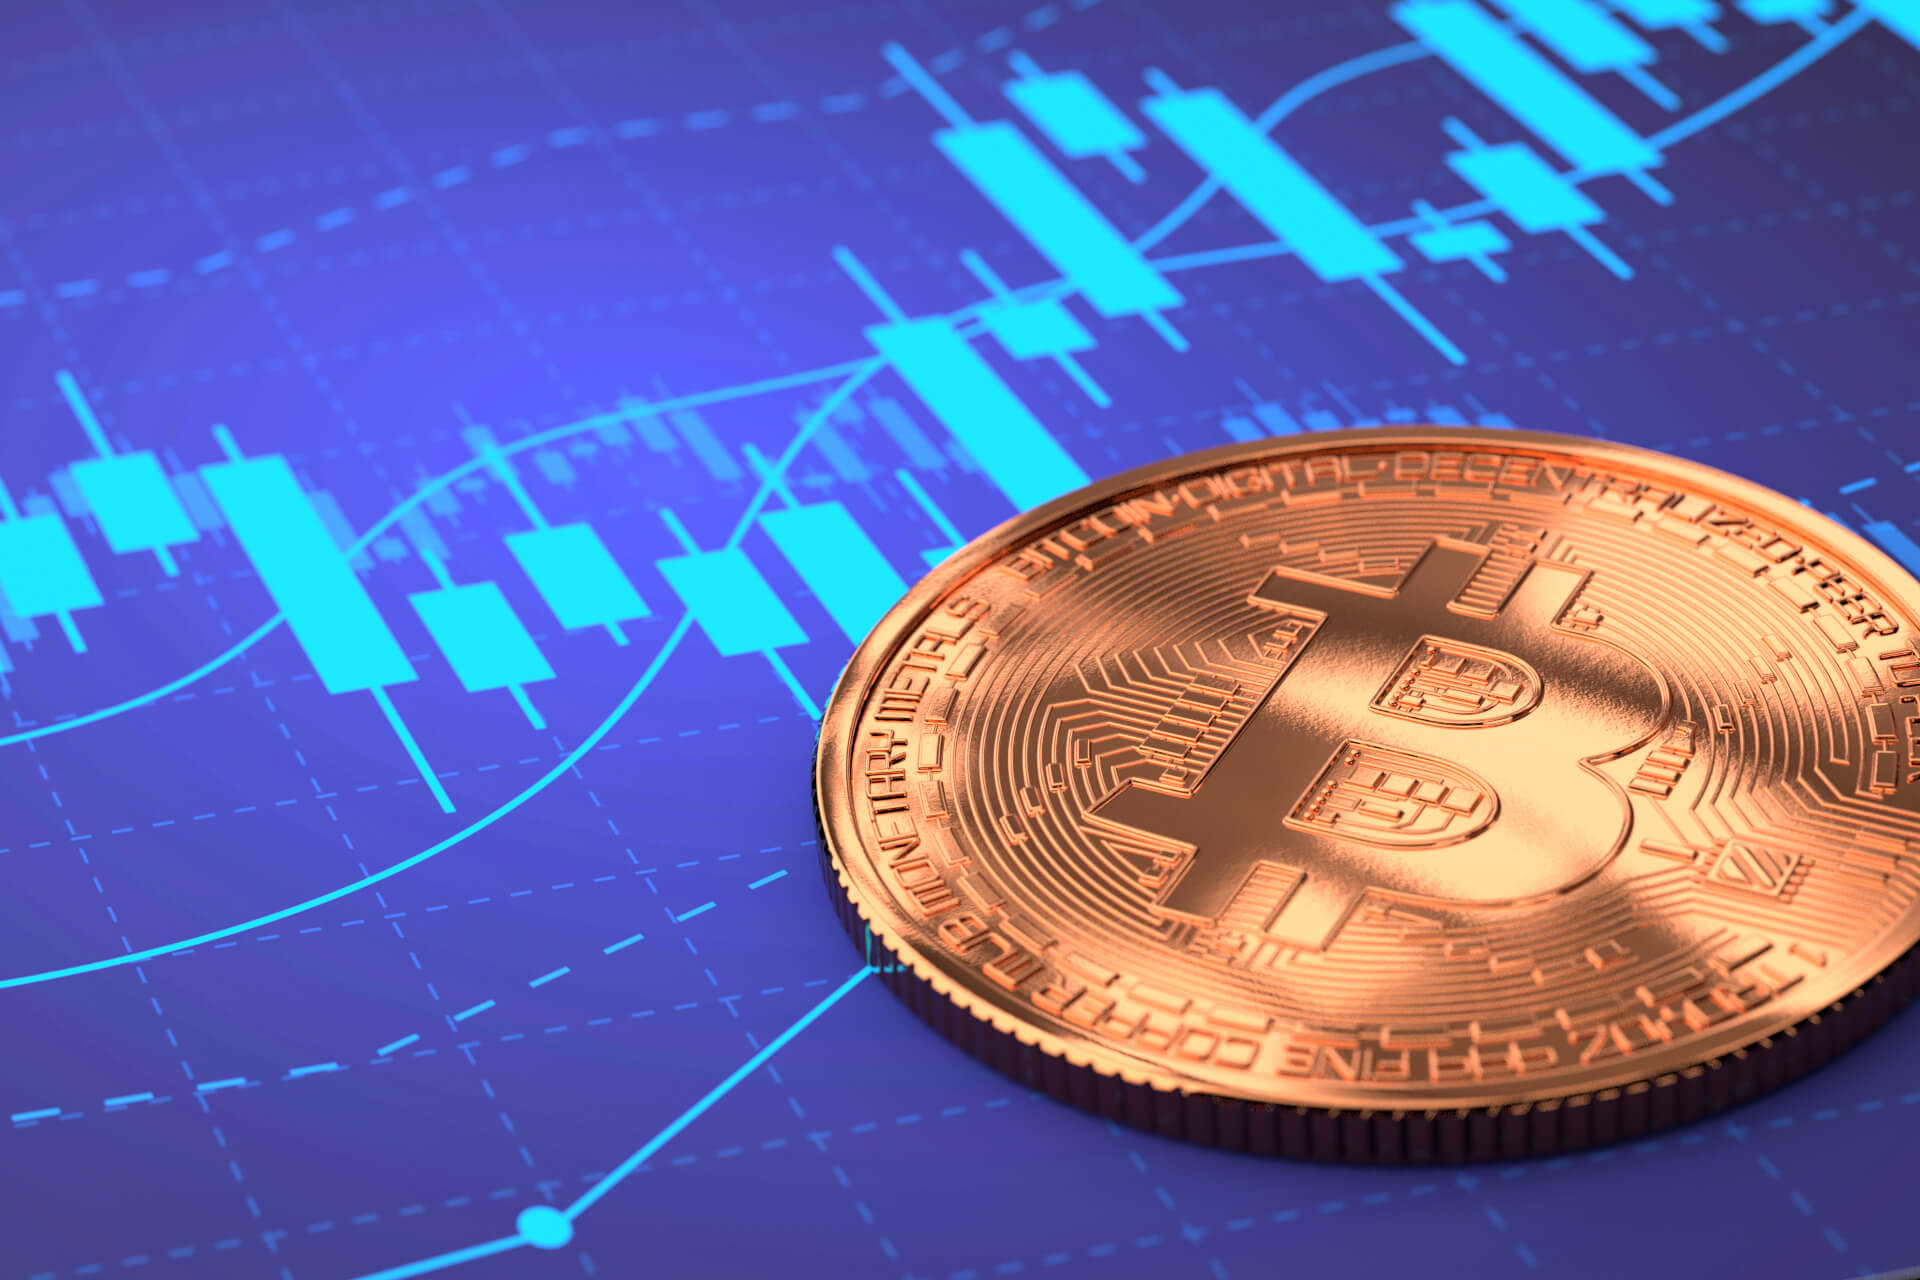 Bitcoin Price Could Restart Increase If It Clears This Key Resistance